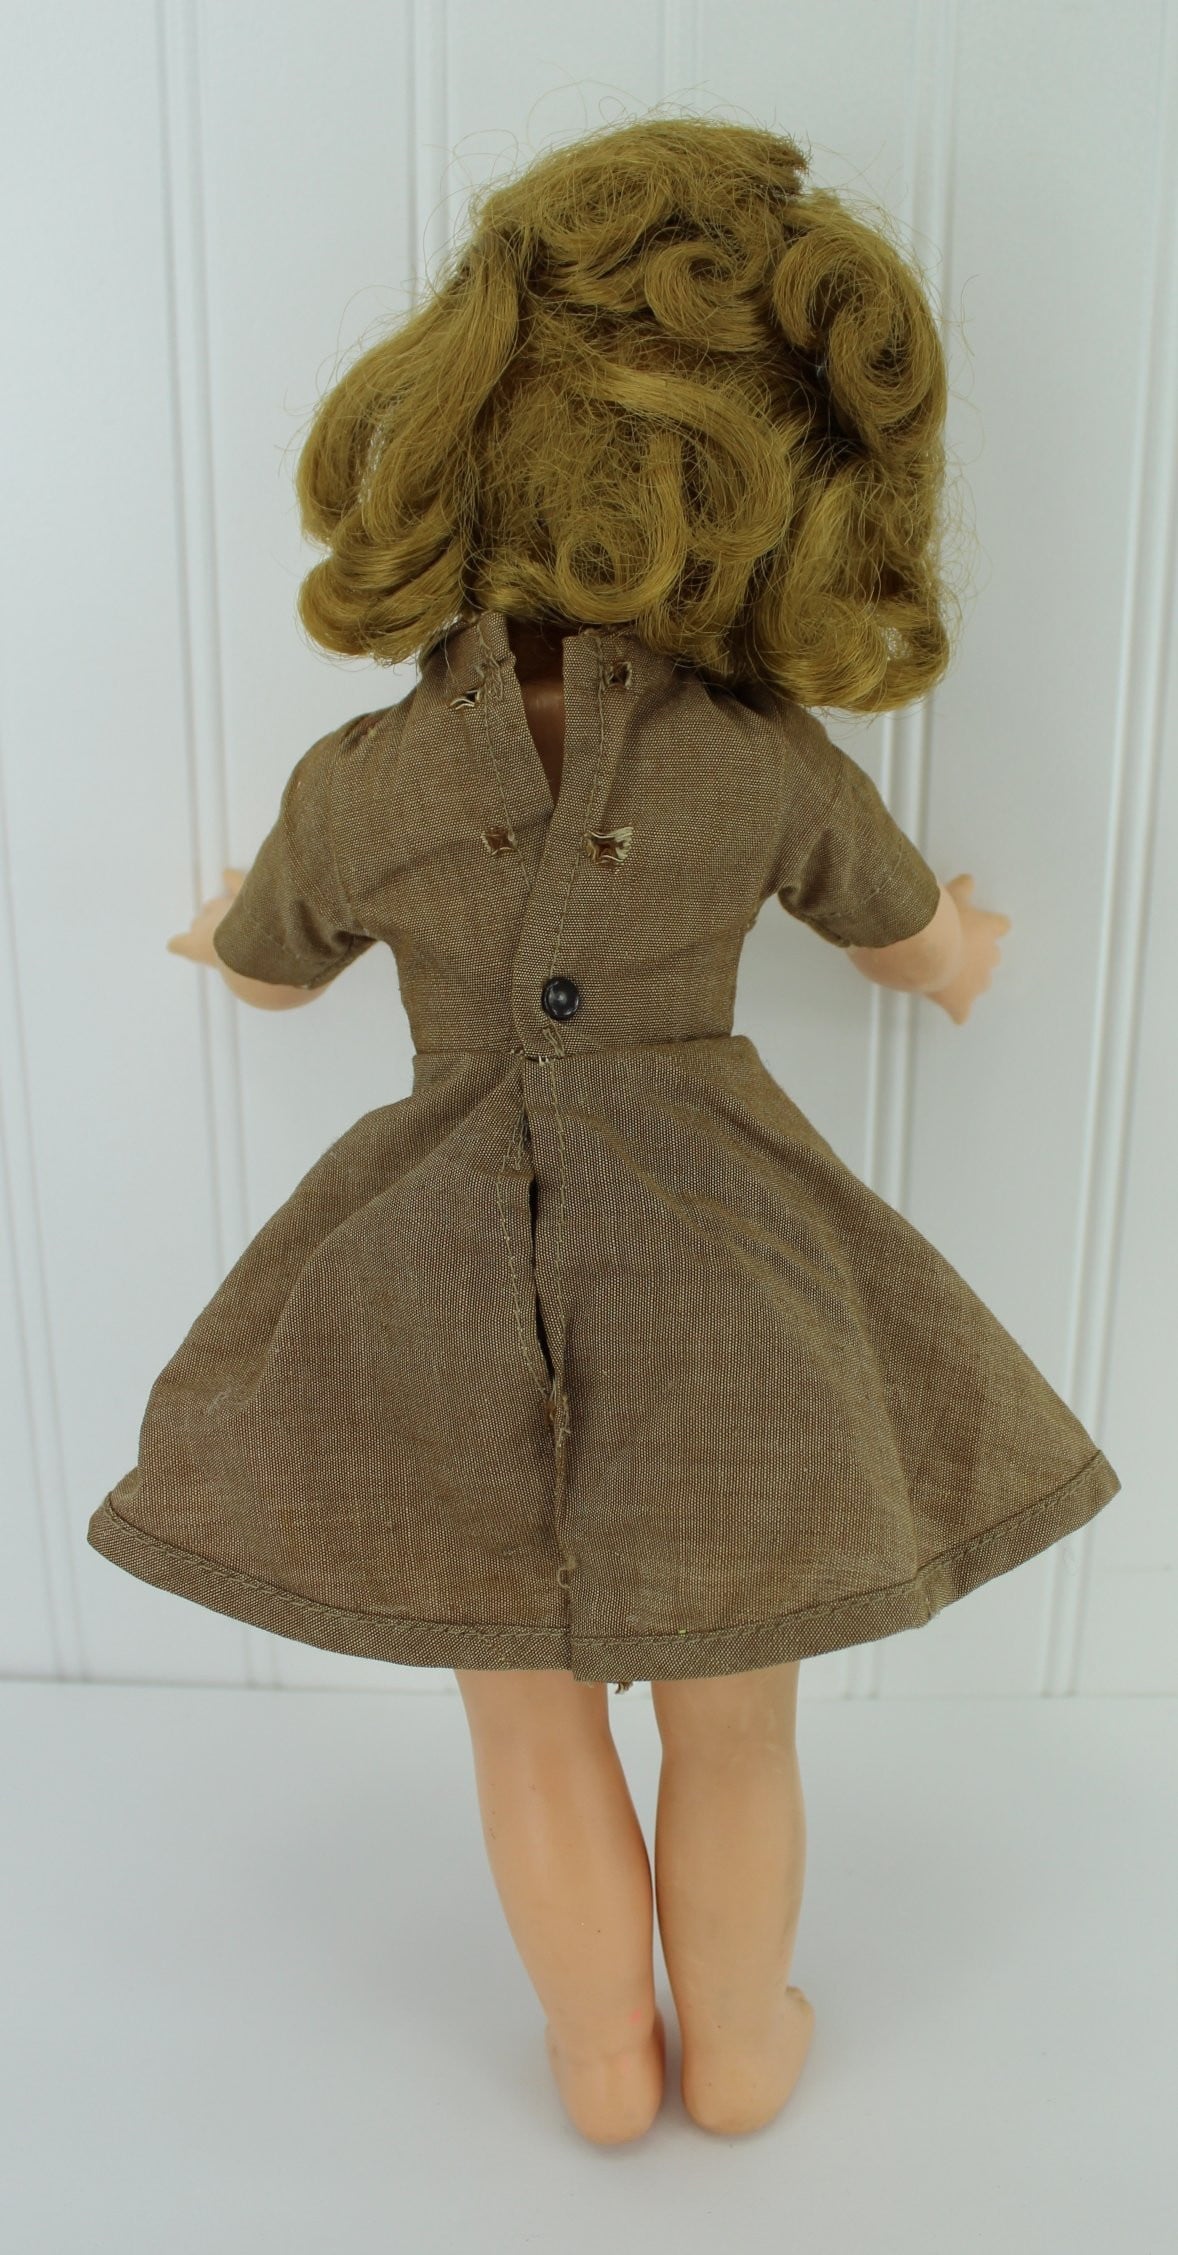 Effanbee 15" Doll Patsy Ann Brownie Girl Scout 1959 mid century doll